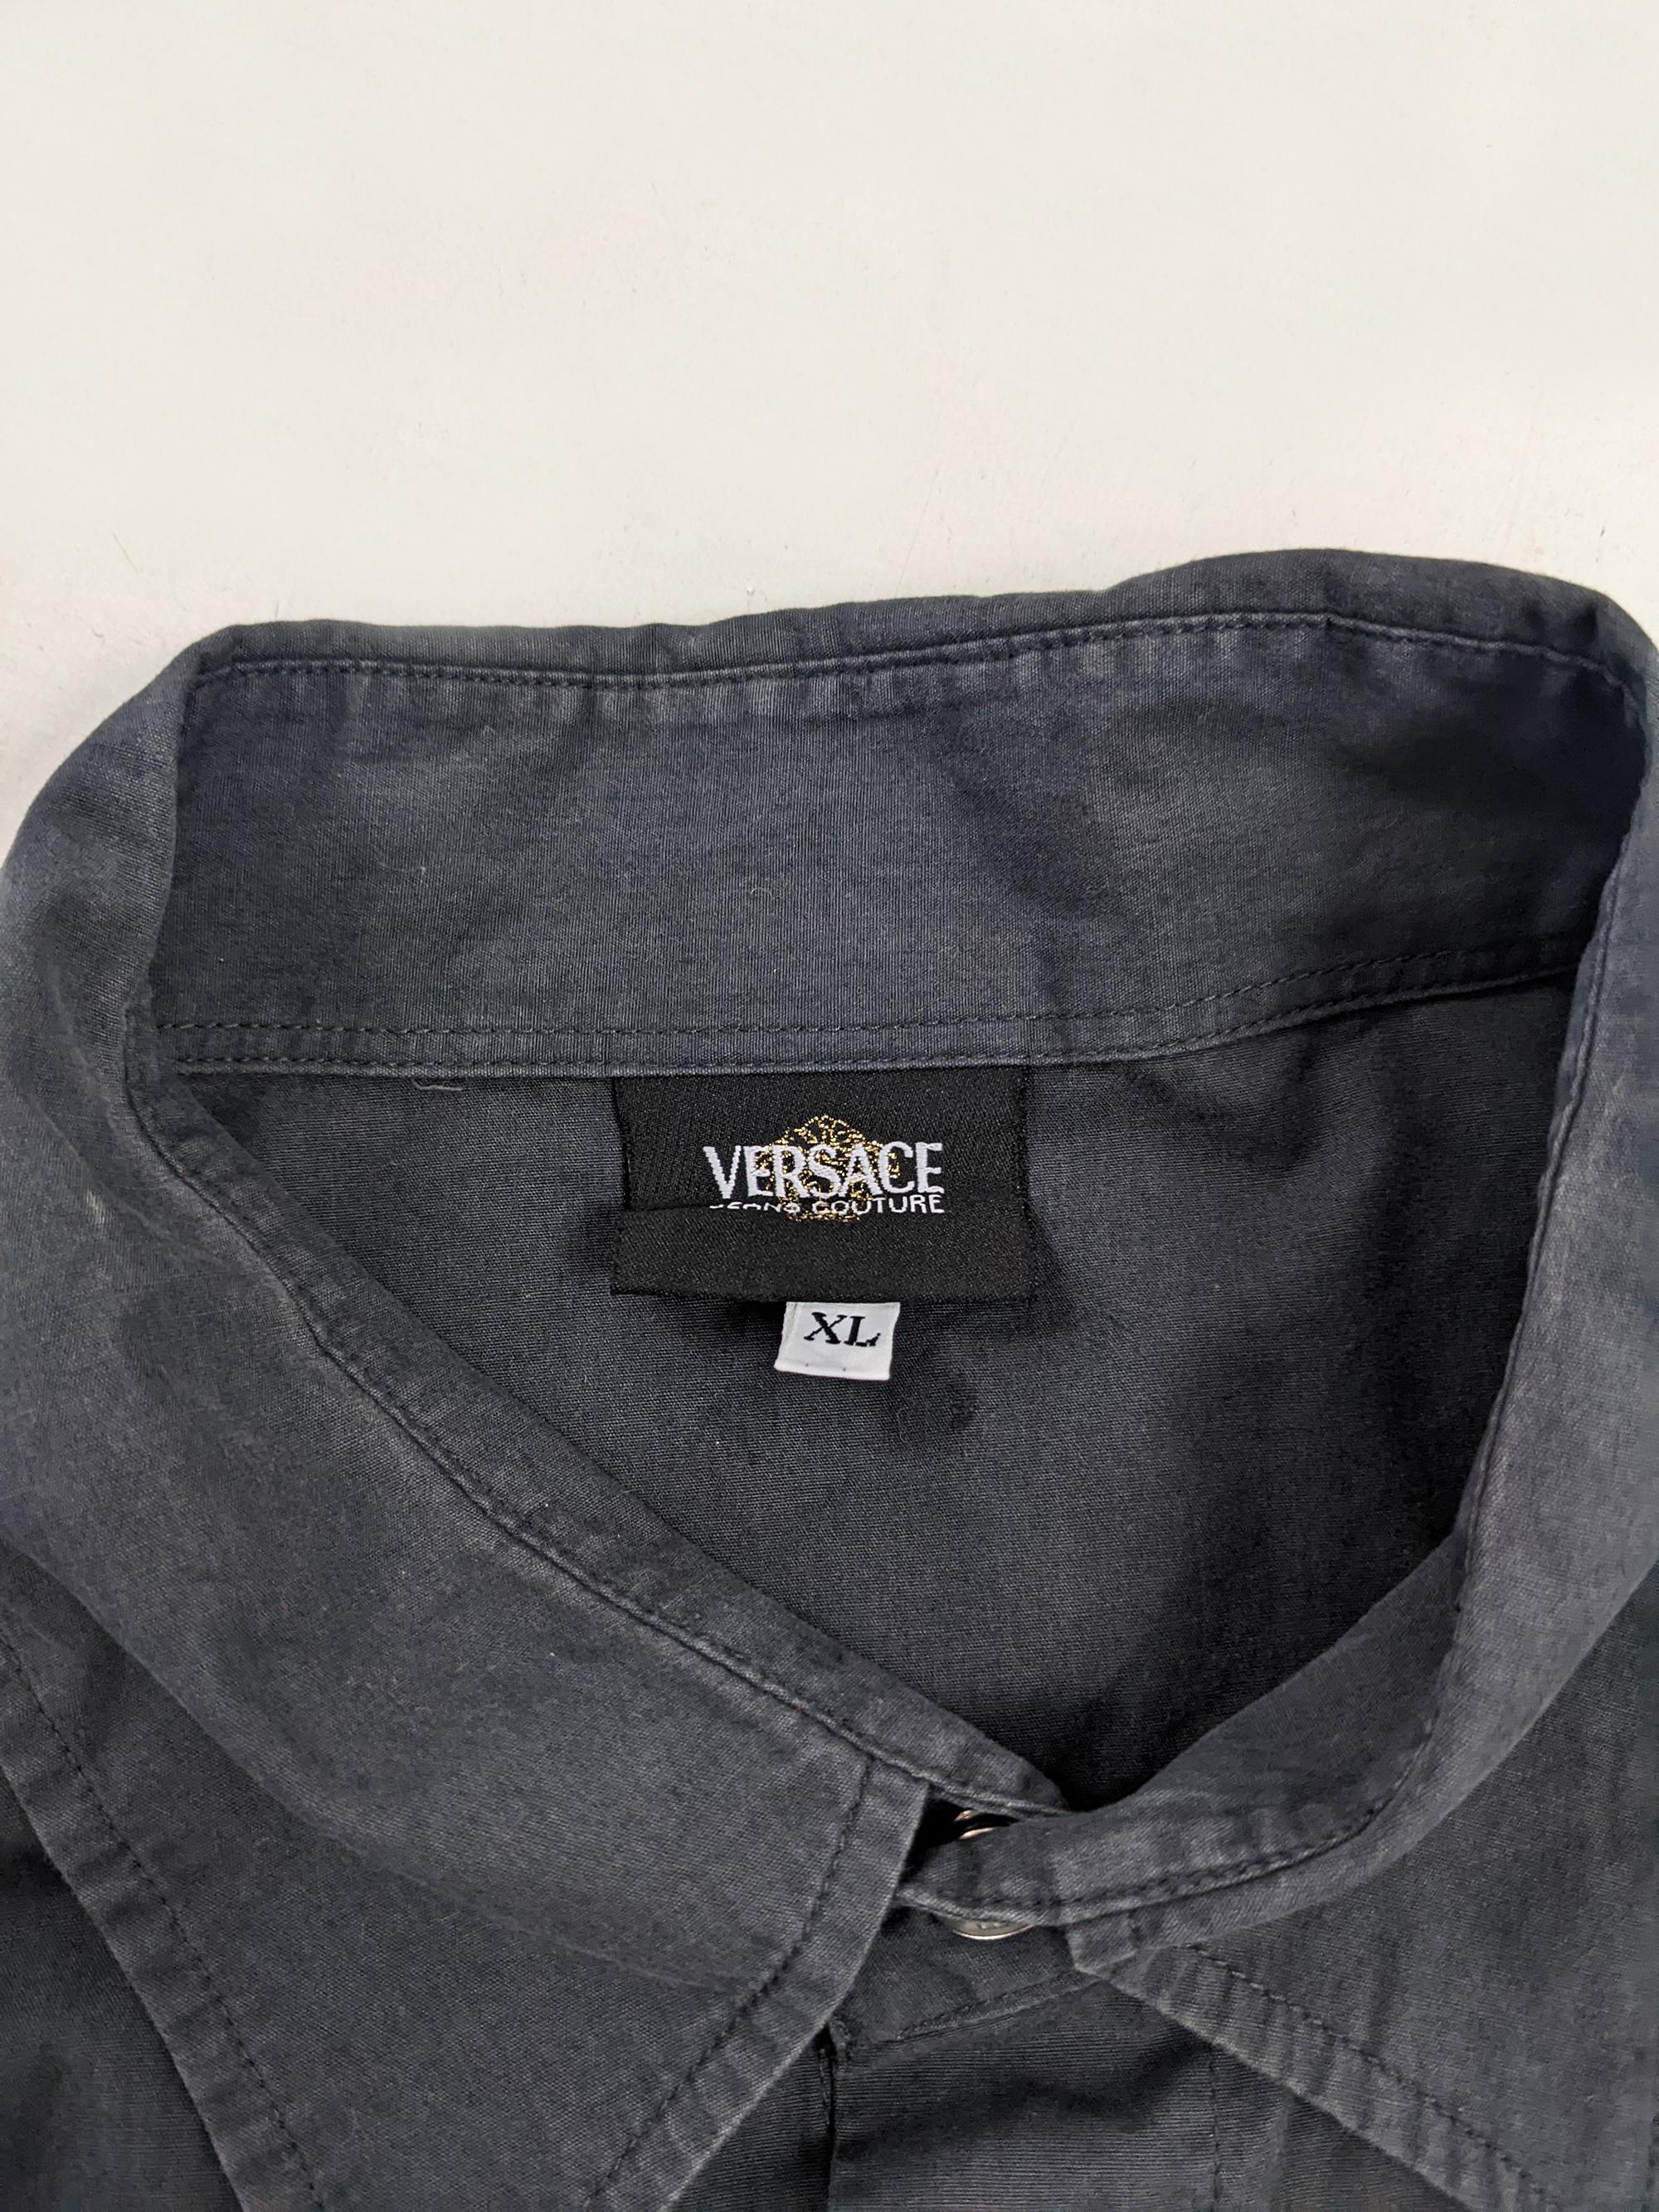 Versus Versace Vintage 1990s Charcoal Grey Shirt Pearl Snaps Gold Embroidery 3